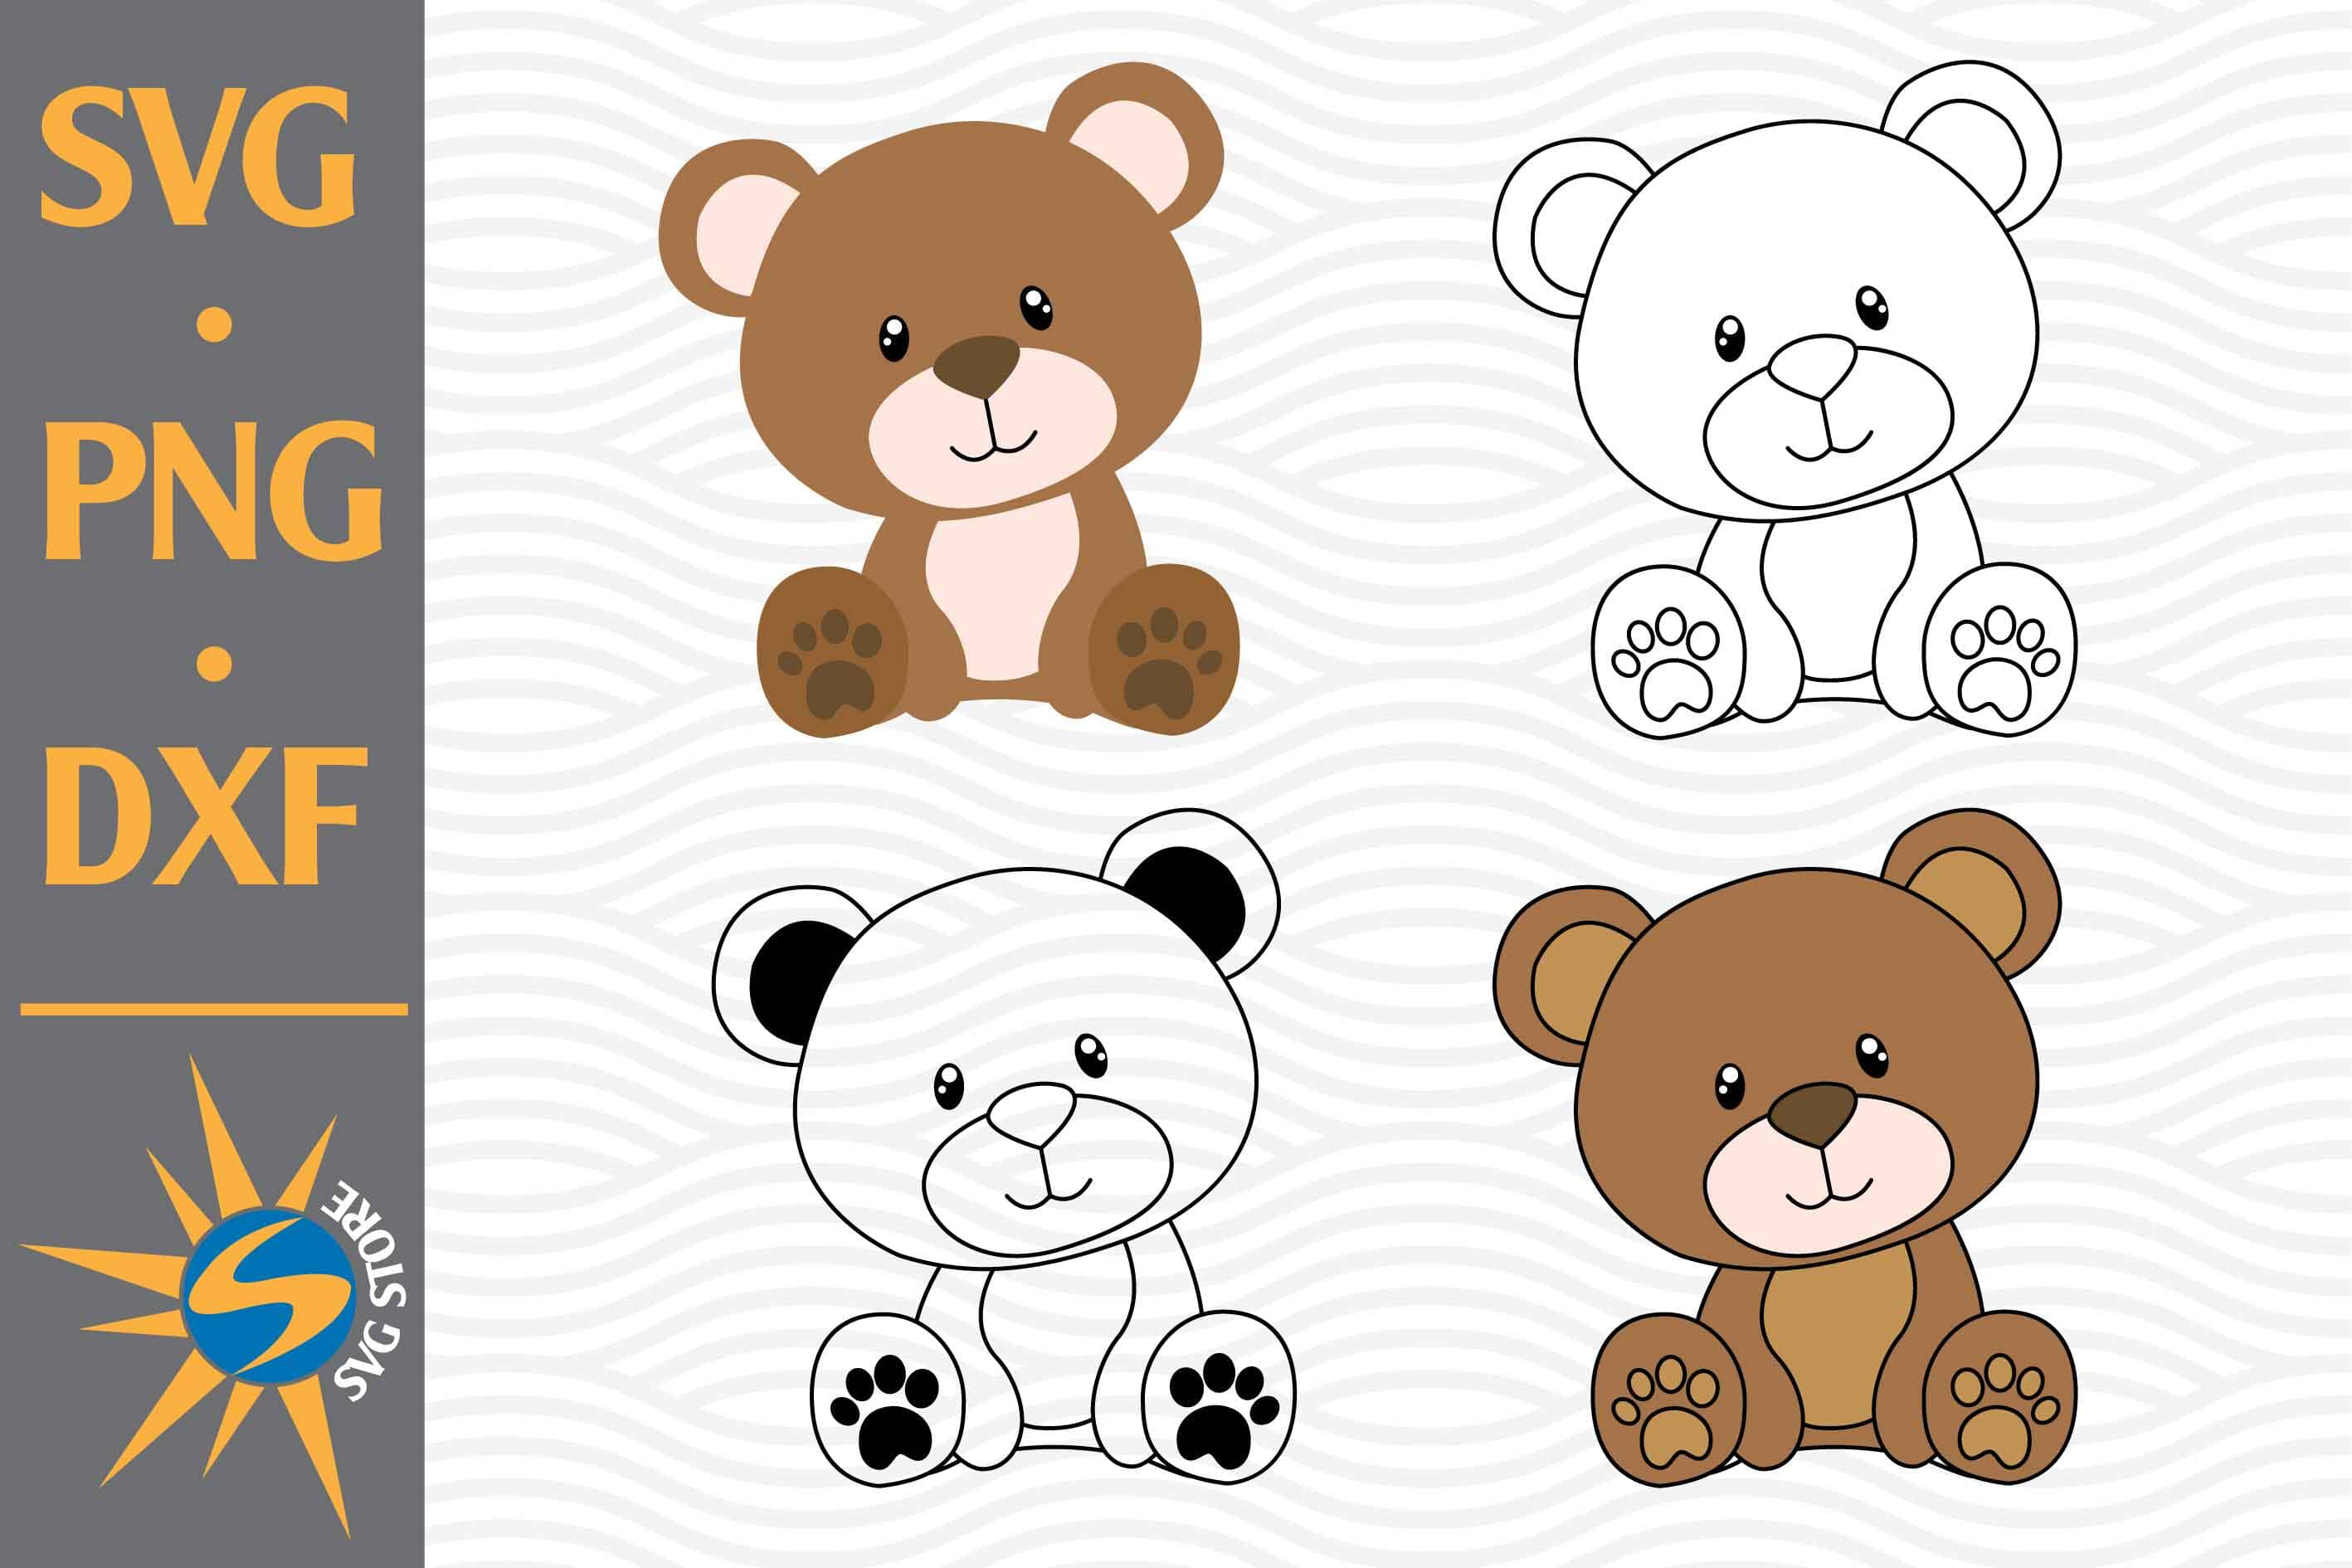 Teddy Bear SVG File: Instant Download for Cricut, Silhouette